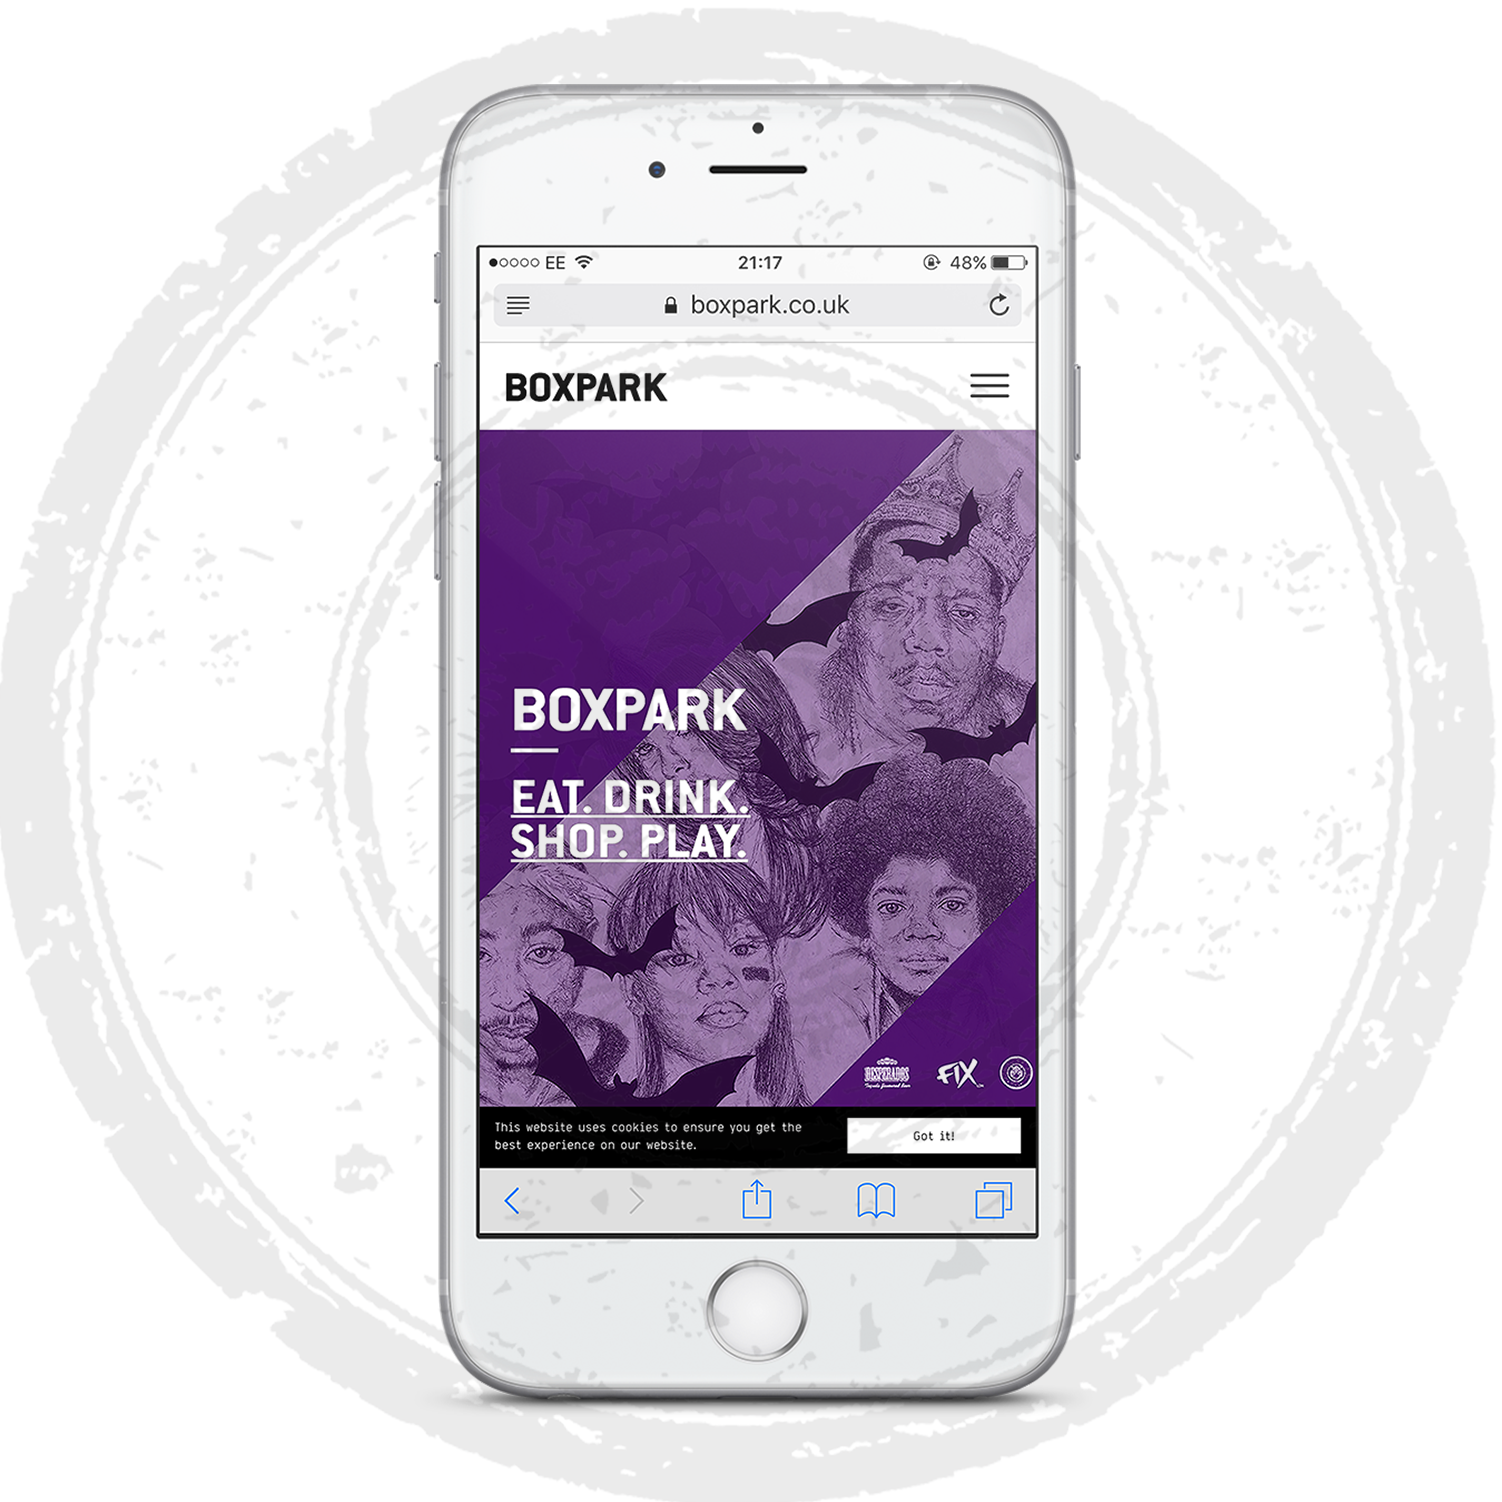 iPhone-6 Boxpark1(1)*.png